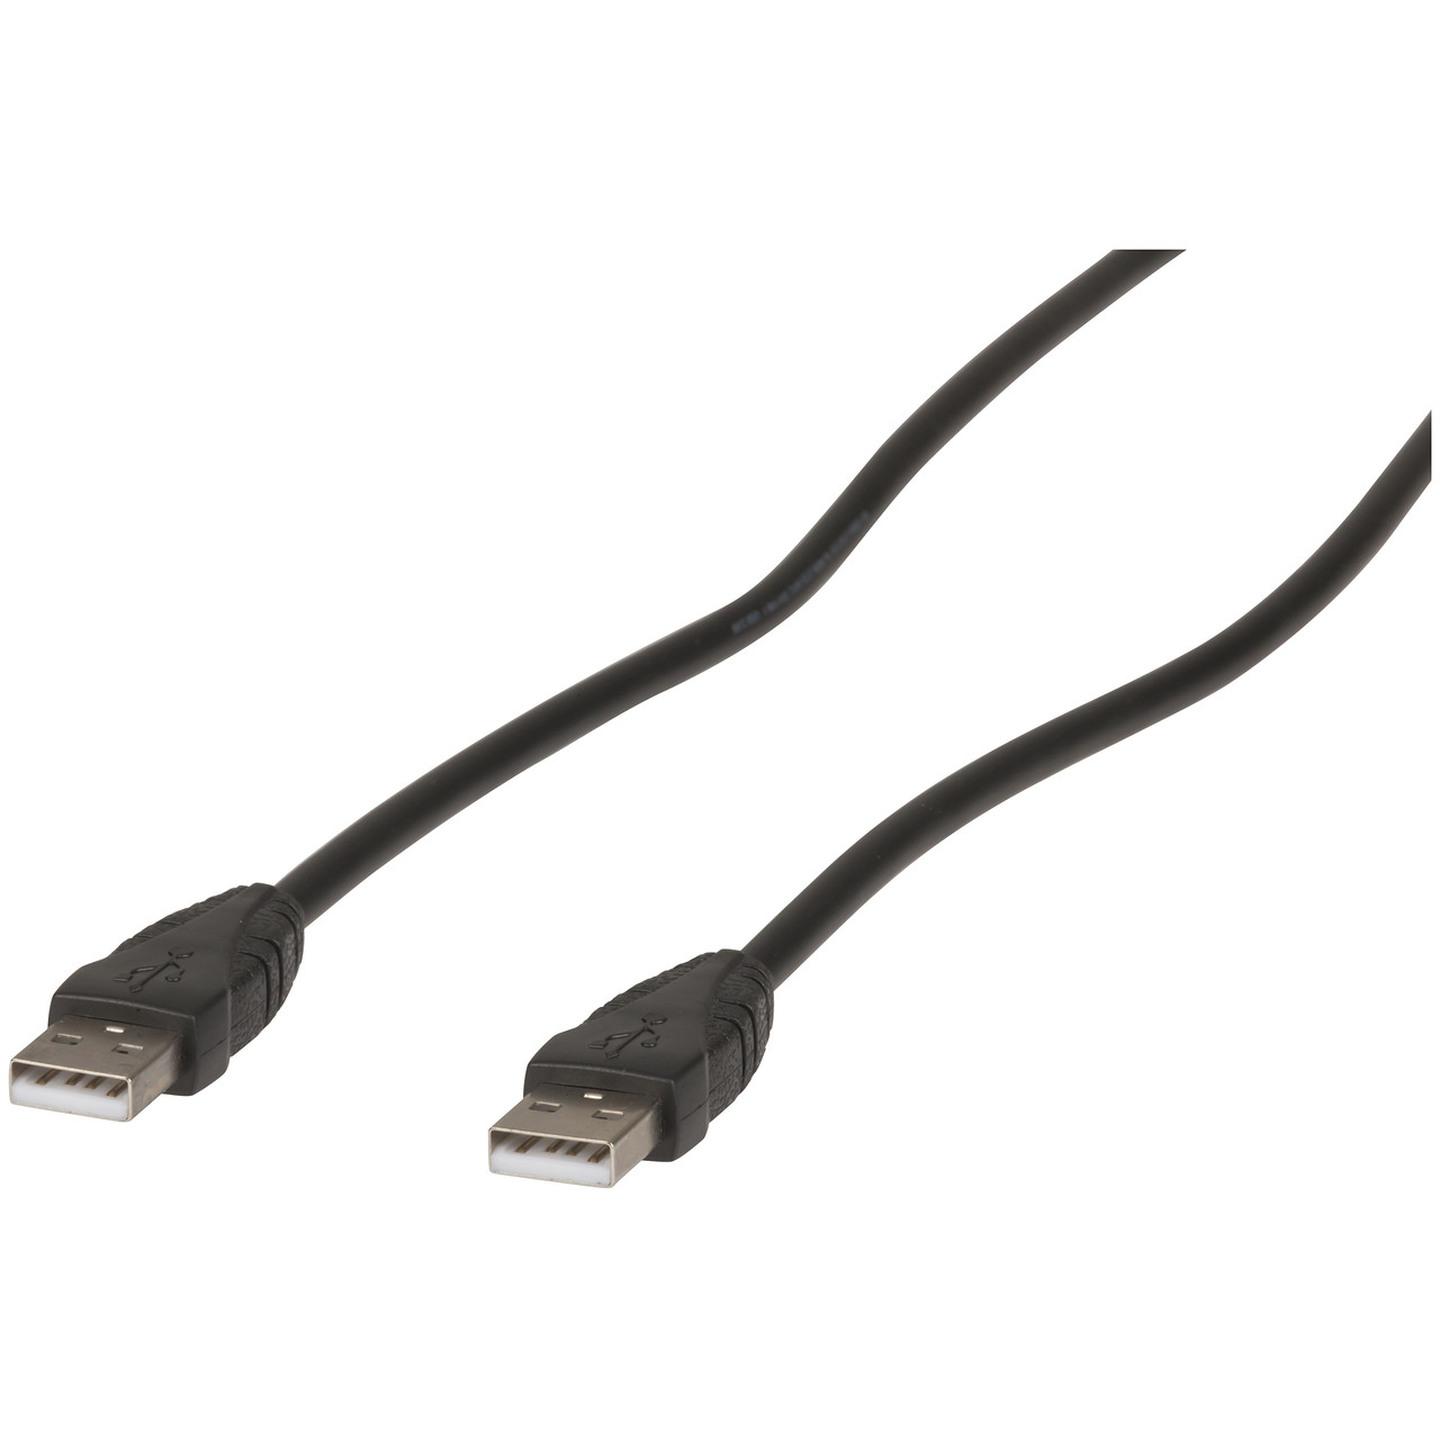 0.5m USB 2.0 A Male to A Male Cable